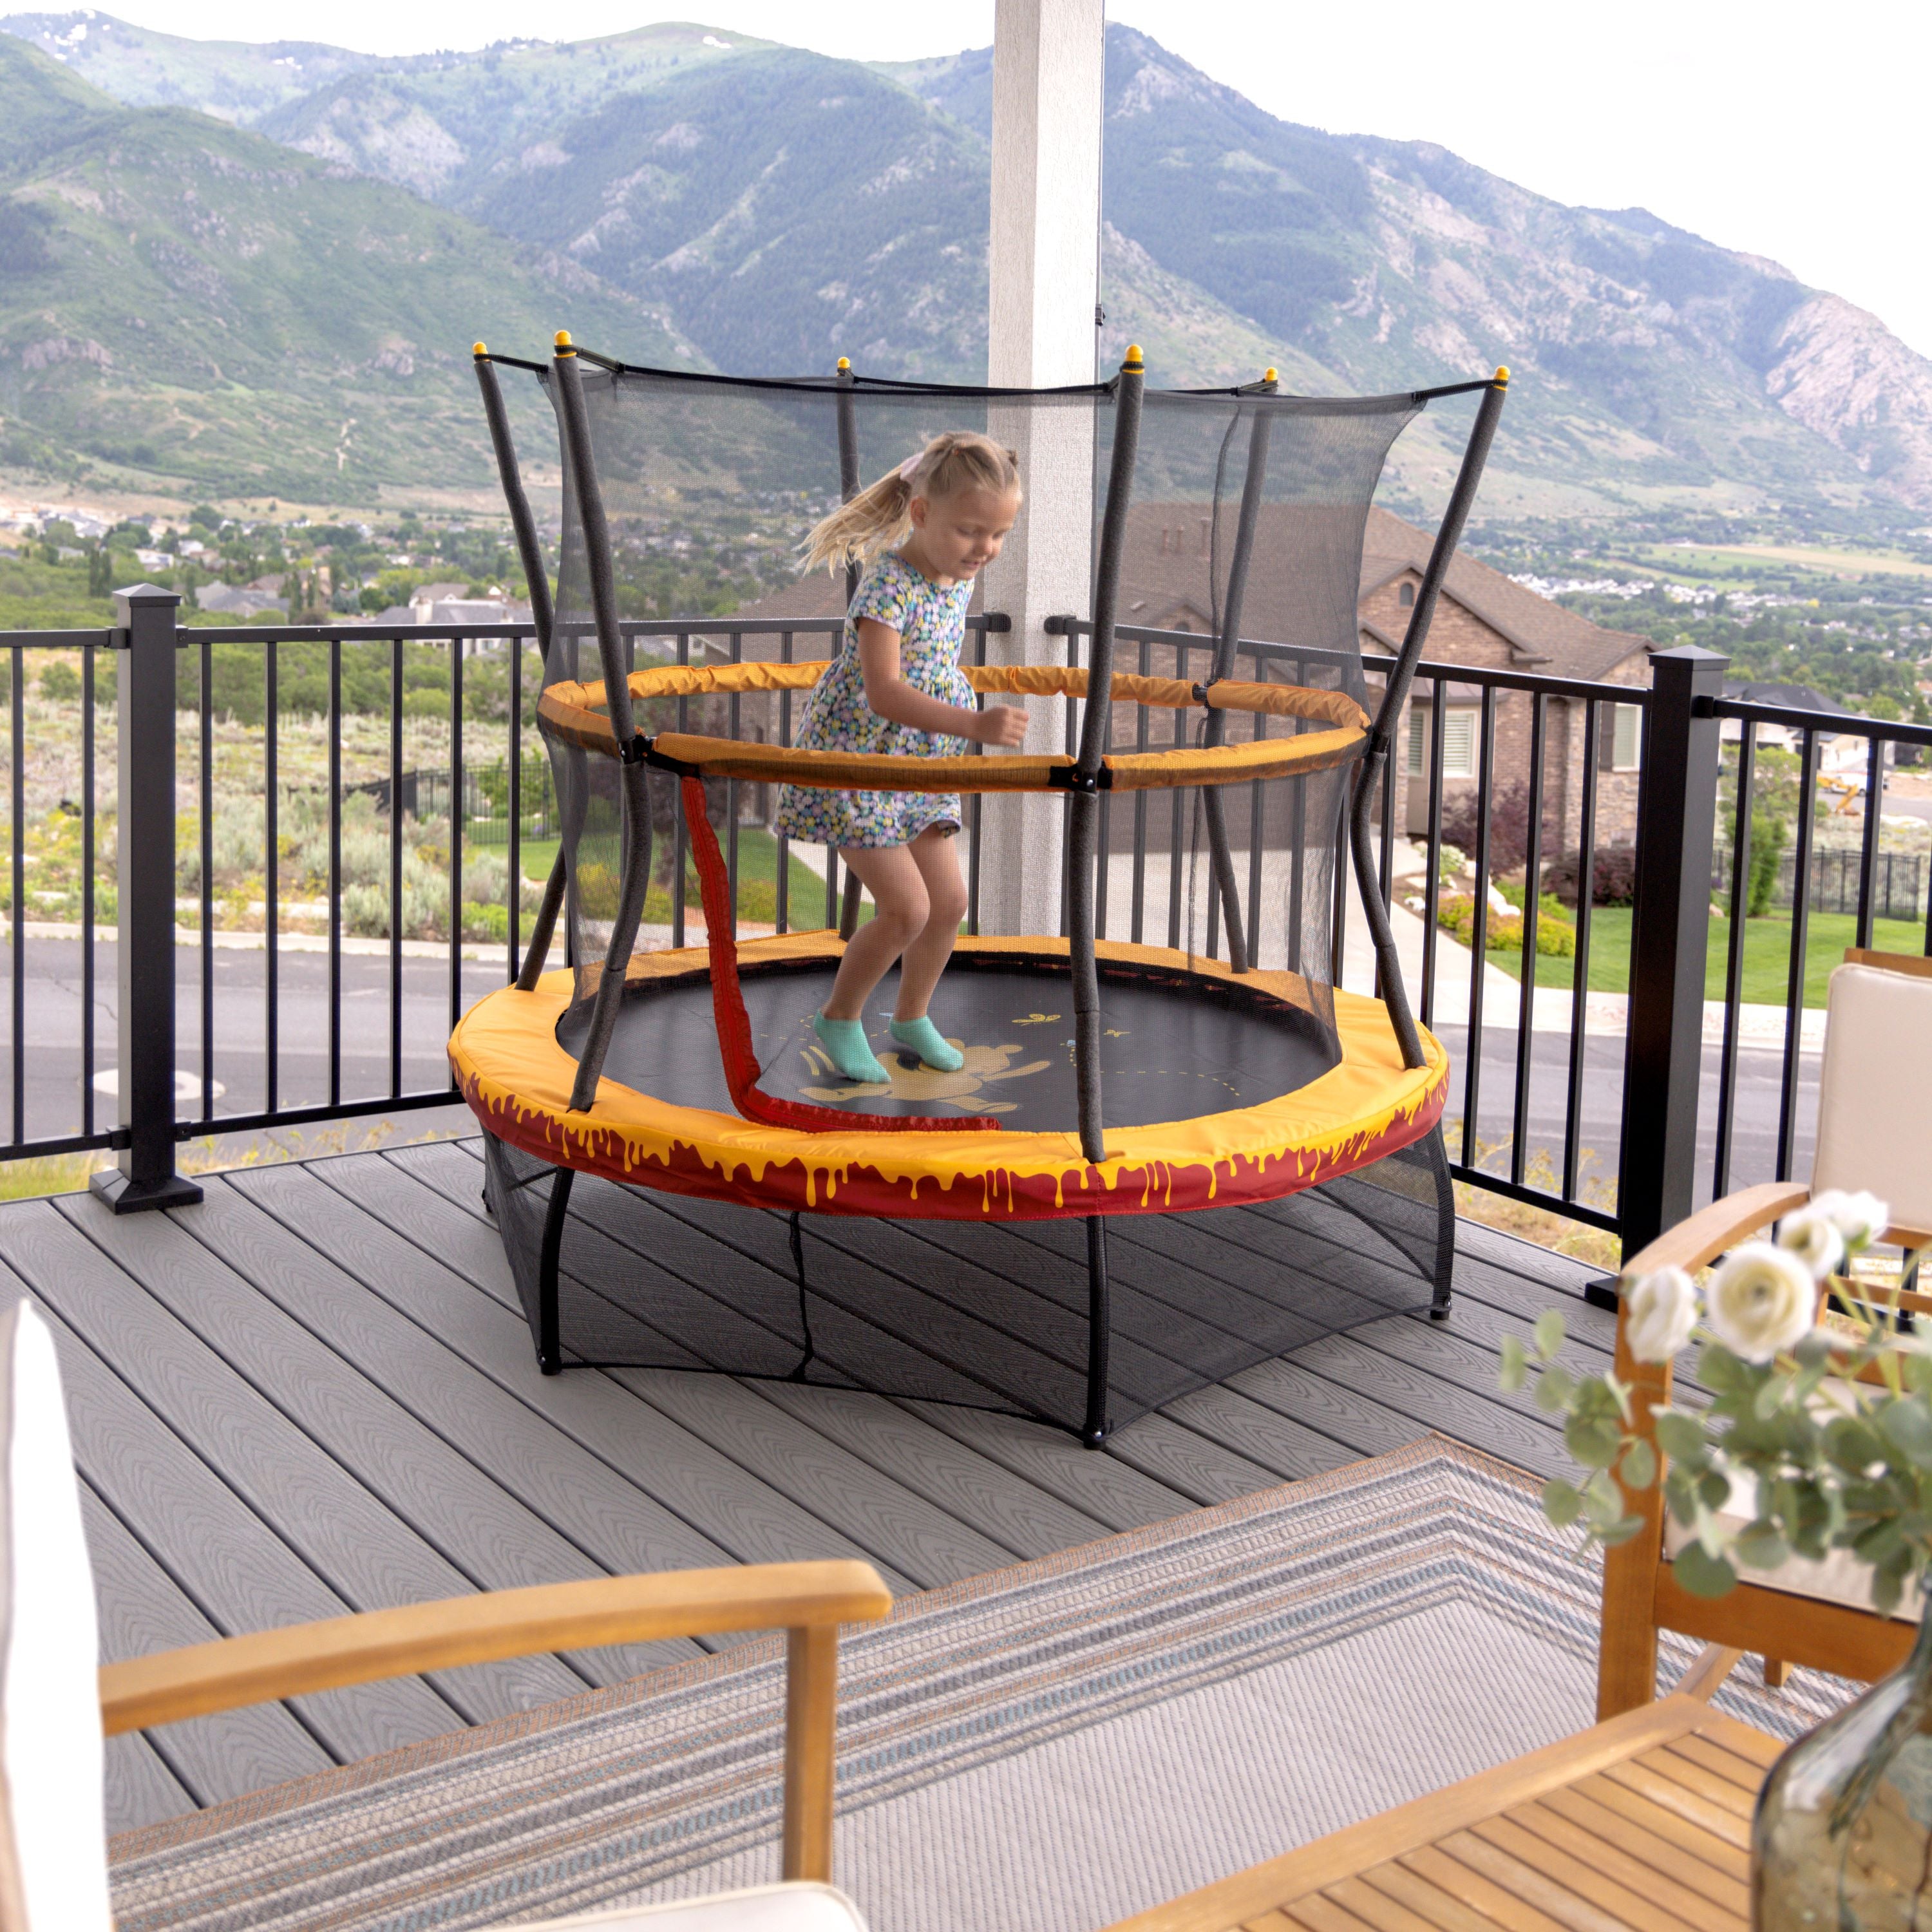 The 60” Winnie the Pooh toddler trampoline sits outdoors on the porch as a young girl jumps on it. 